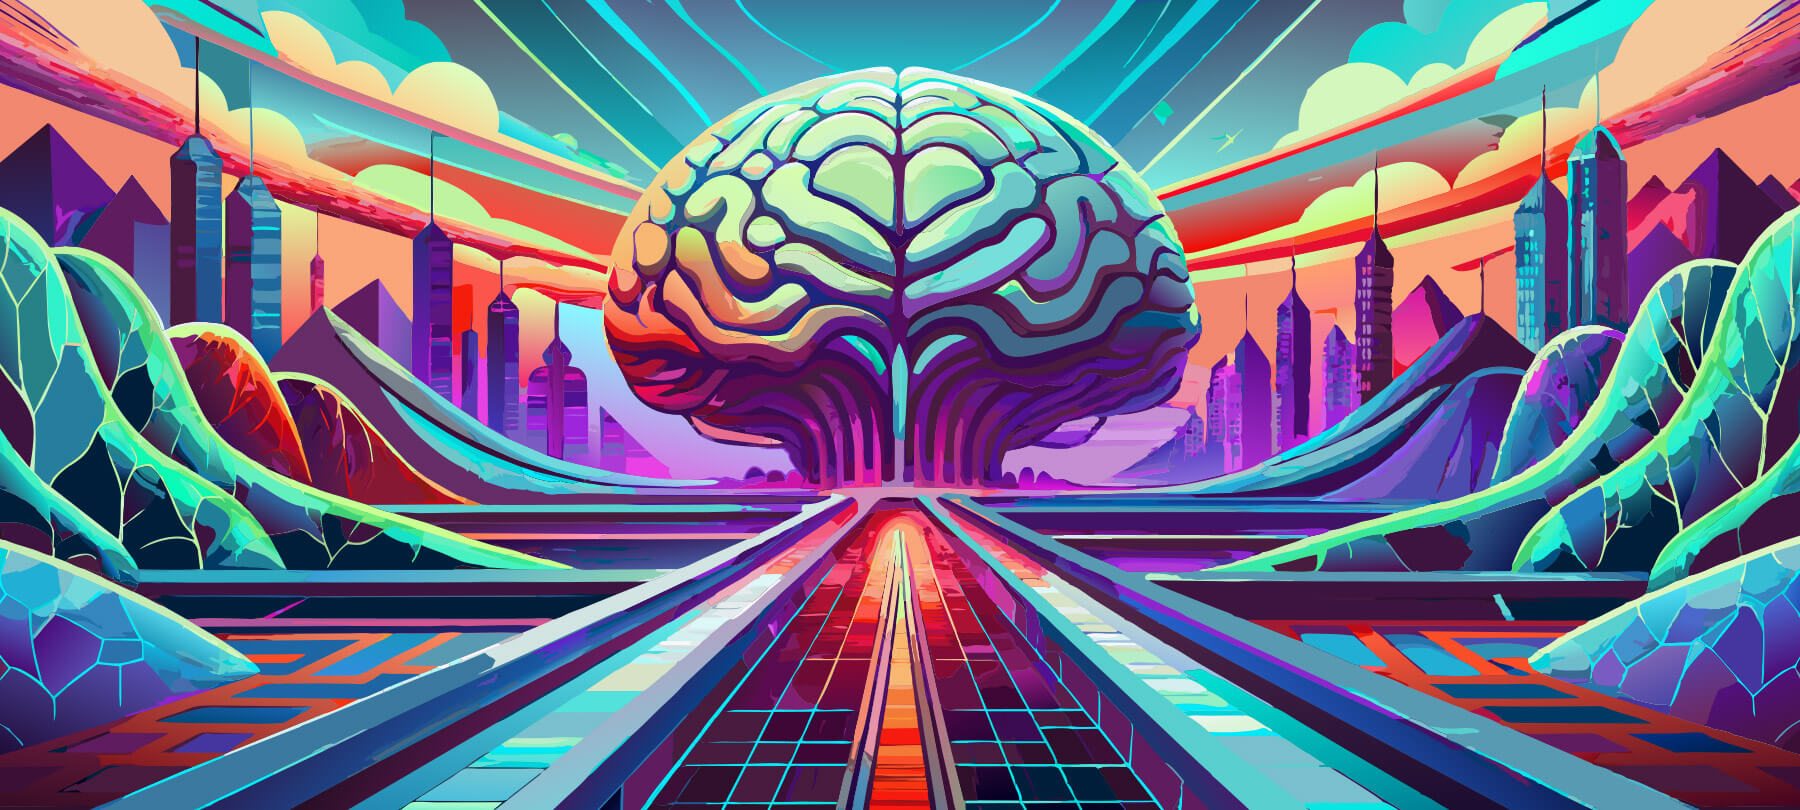 AI generated image. A large brain sits at the end of a long path, wiht a light coming from the stem of the brain. Surrounded by mountains, in vivid colors